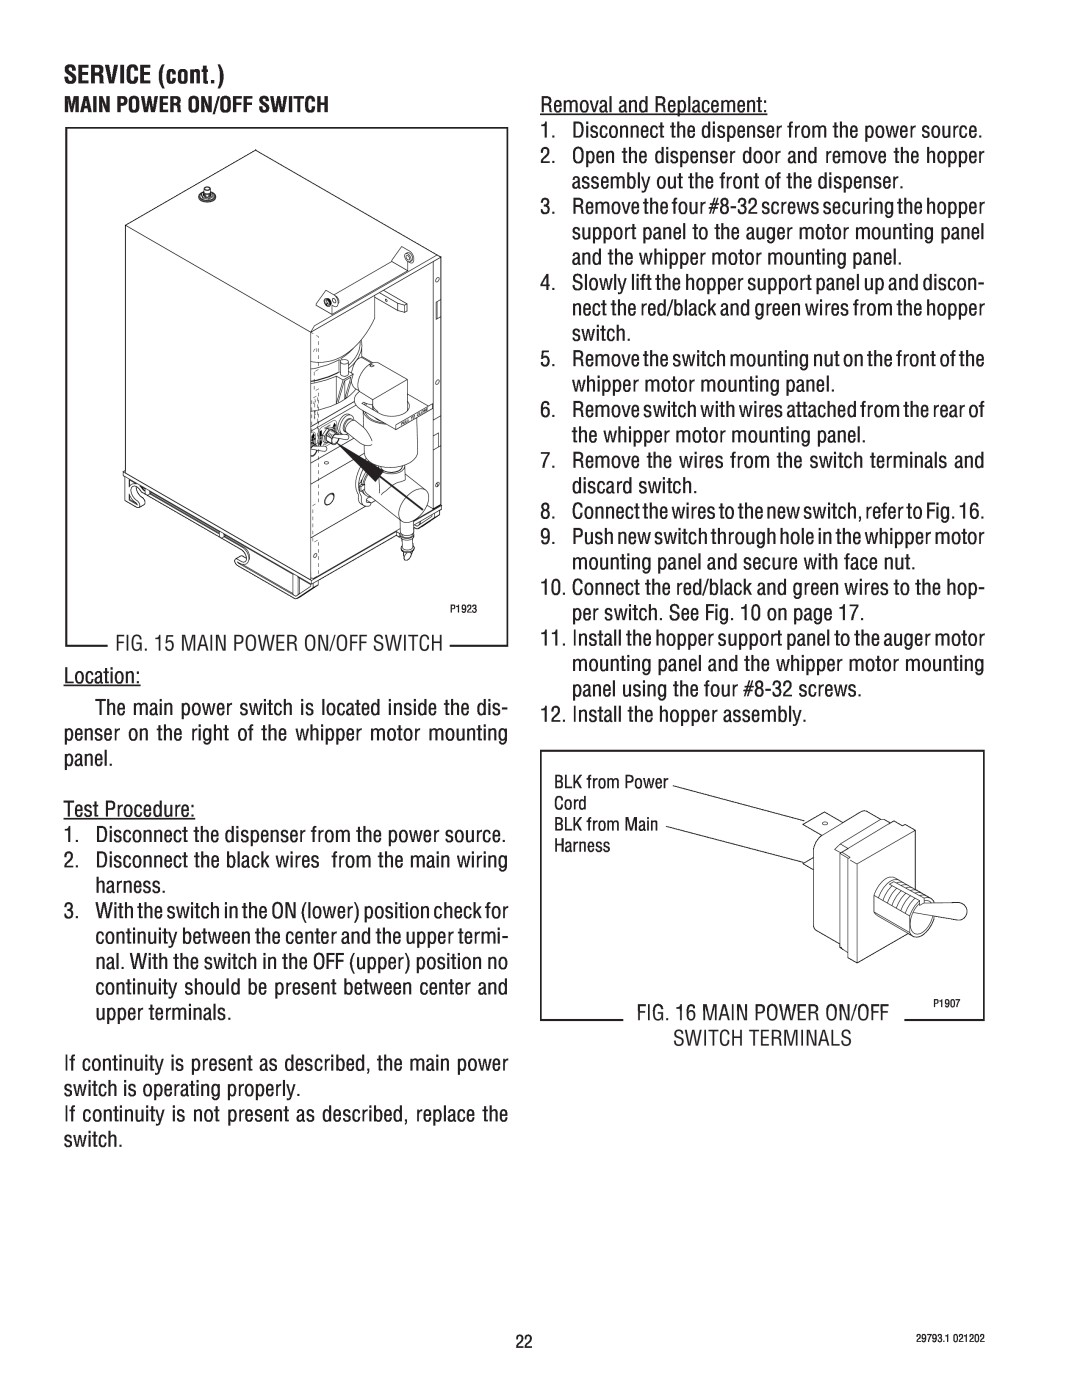 Bunn dispenser service manual Main Power On/Off Switch, SERVICE cont 